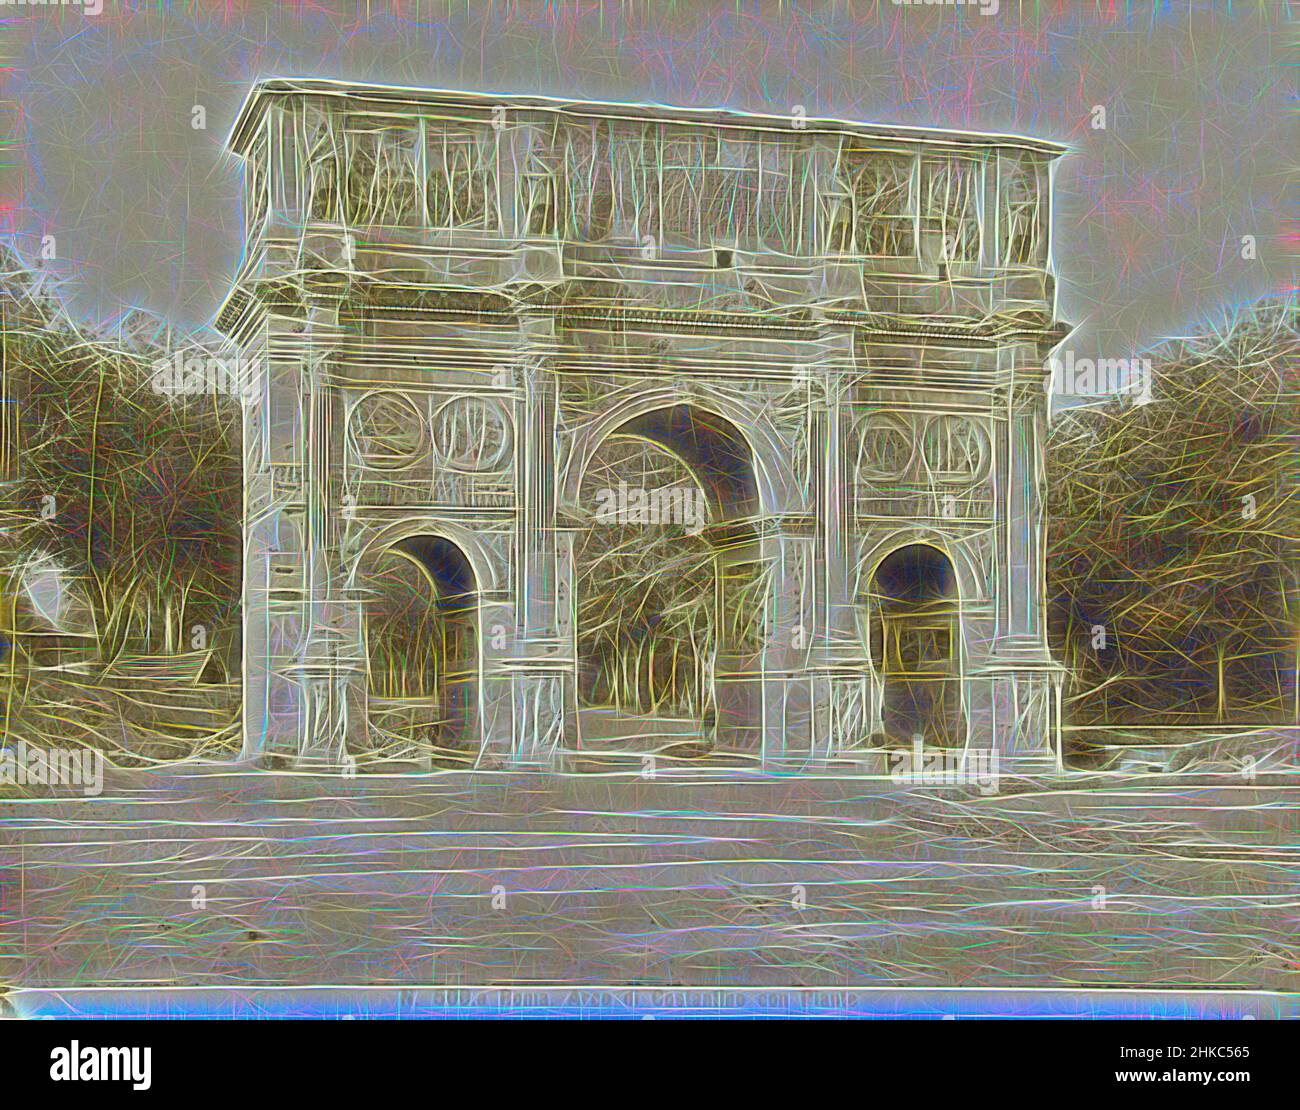 Inspired by Arch of Constantine at Rome, N. 500.a Roma. Arco di Constantino con Piante, Rome, c. 1880 - c. 1904, paper, albumen print, height 199 mm × width 255 mmheight 241 mm × width 327 mm, Reimagined by Artotop. Classic art reinvented with a modern twist. Design of warm cheerful glowing of brightness and light ray radiance. Photography inspired by surrealism and futurism, embracing dynamic energy of modern technology, movement, speed and revolutionize culture Stock Photo